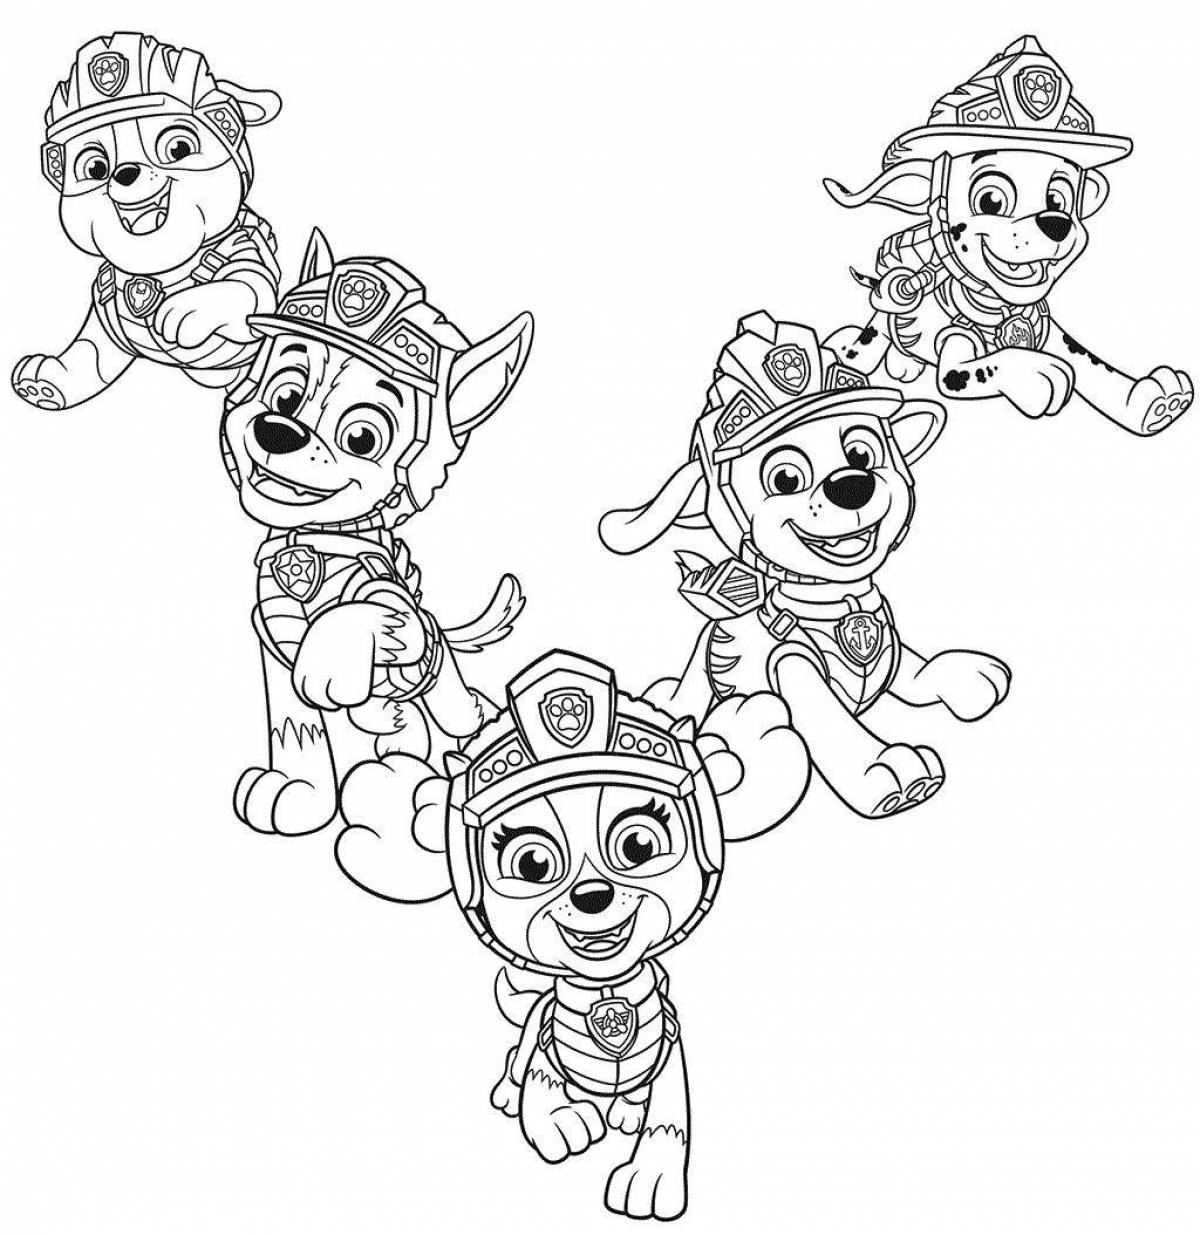 Cute paw patrol puppies coloring page